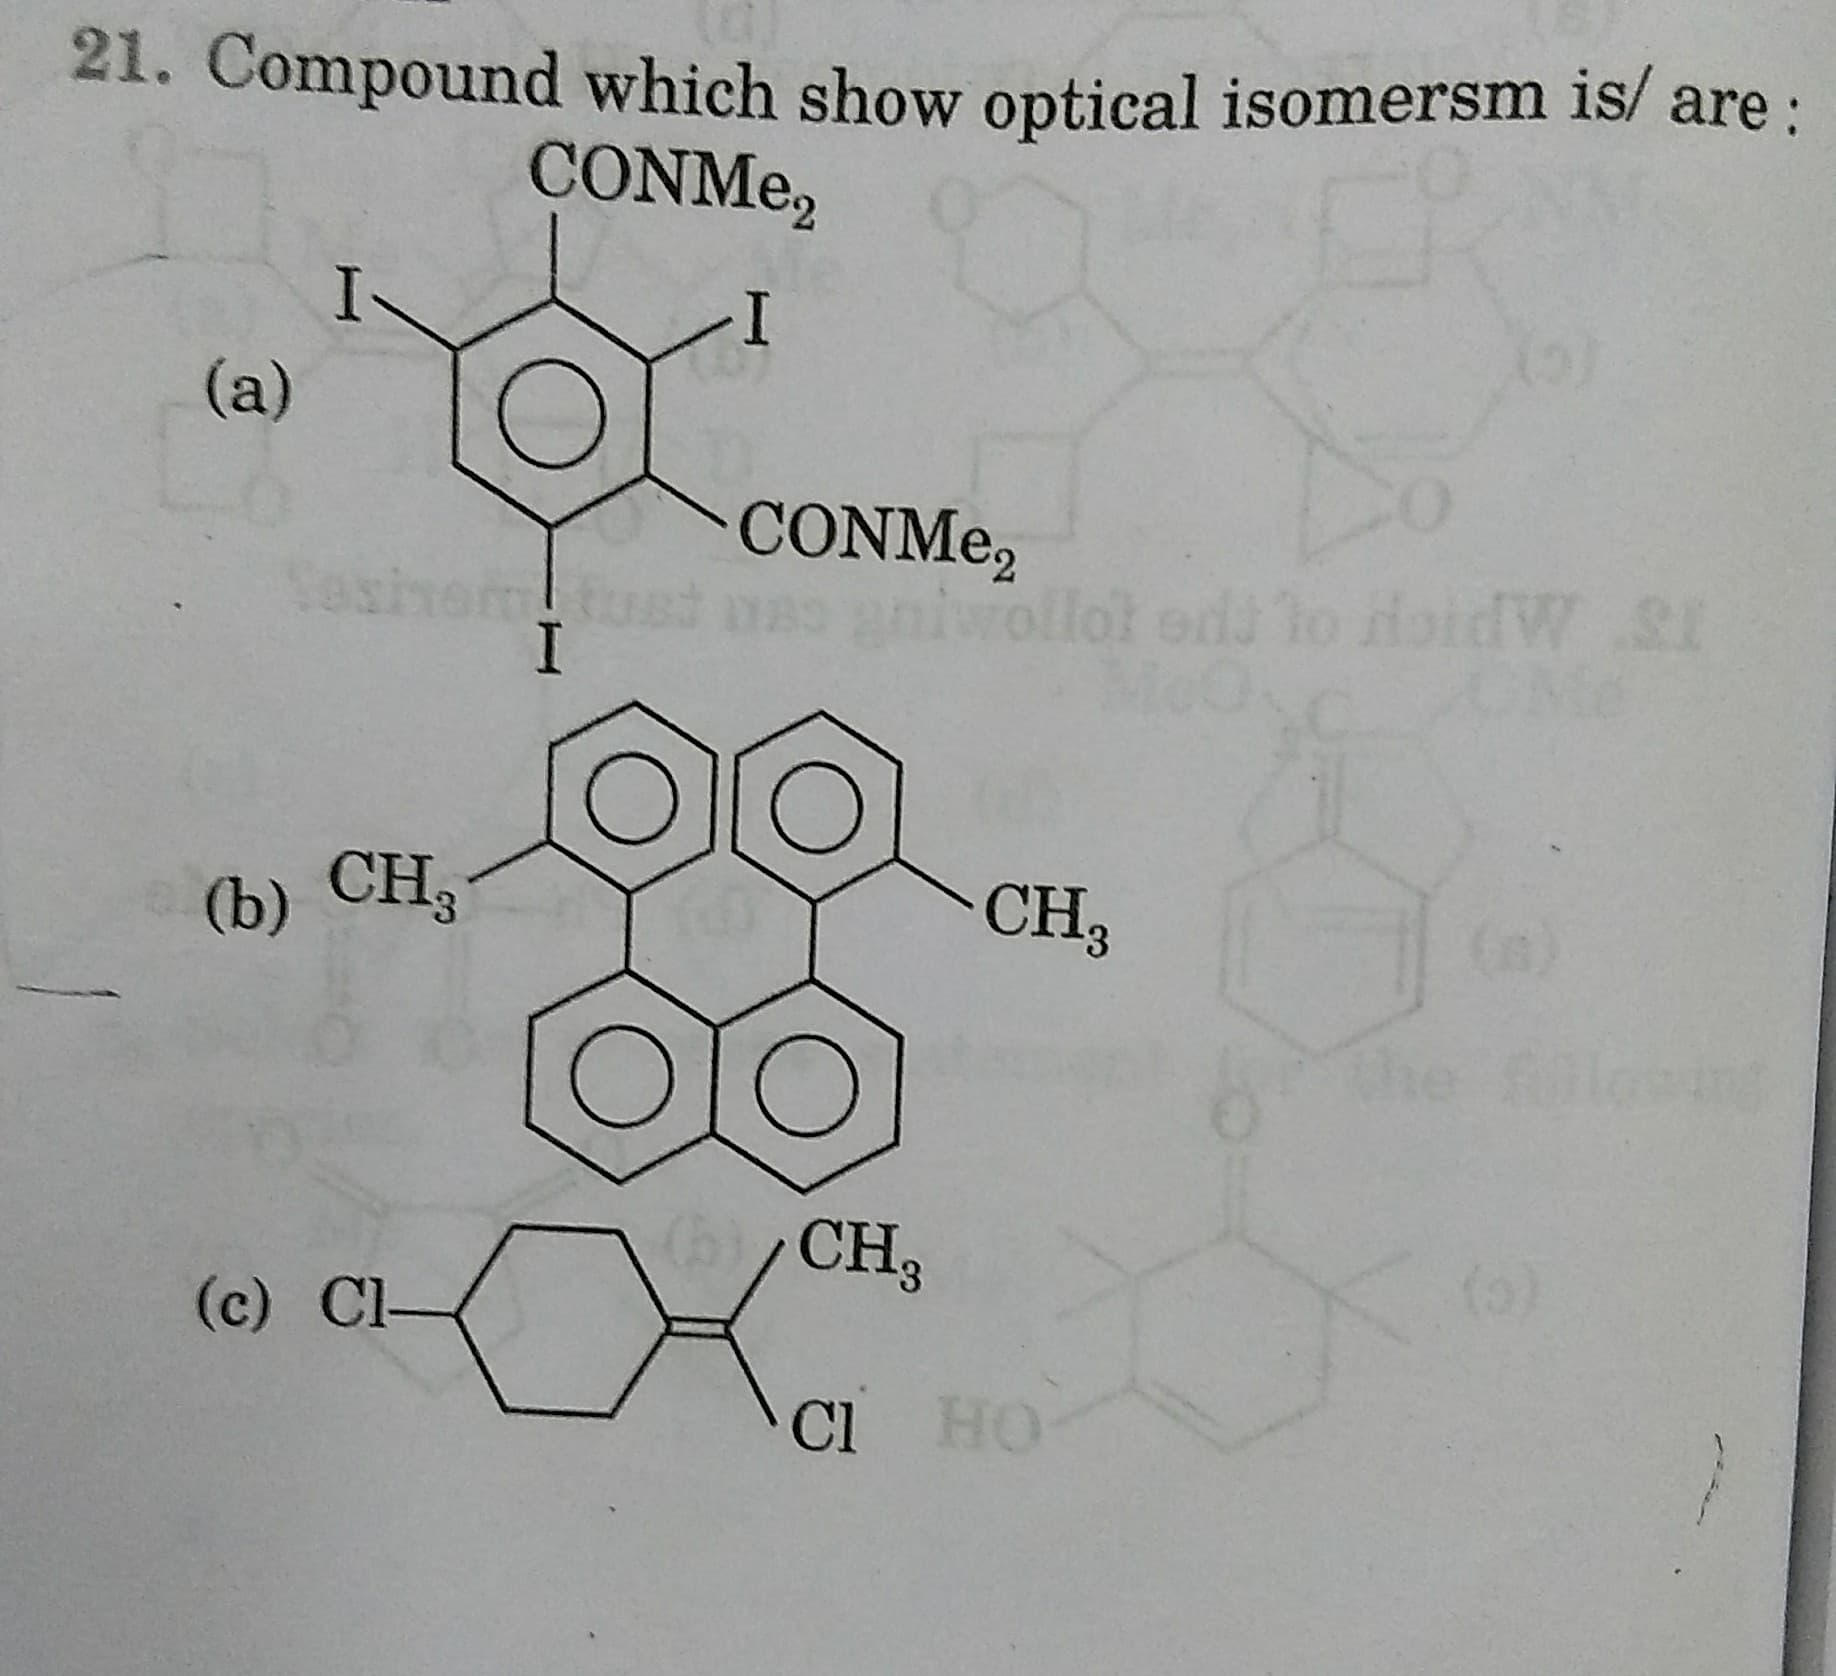 21. Compound which show optical isomersm is/ are:
CONME,
(G)
(a)
CONME,
niwollot odi to
dW SI
